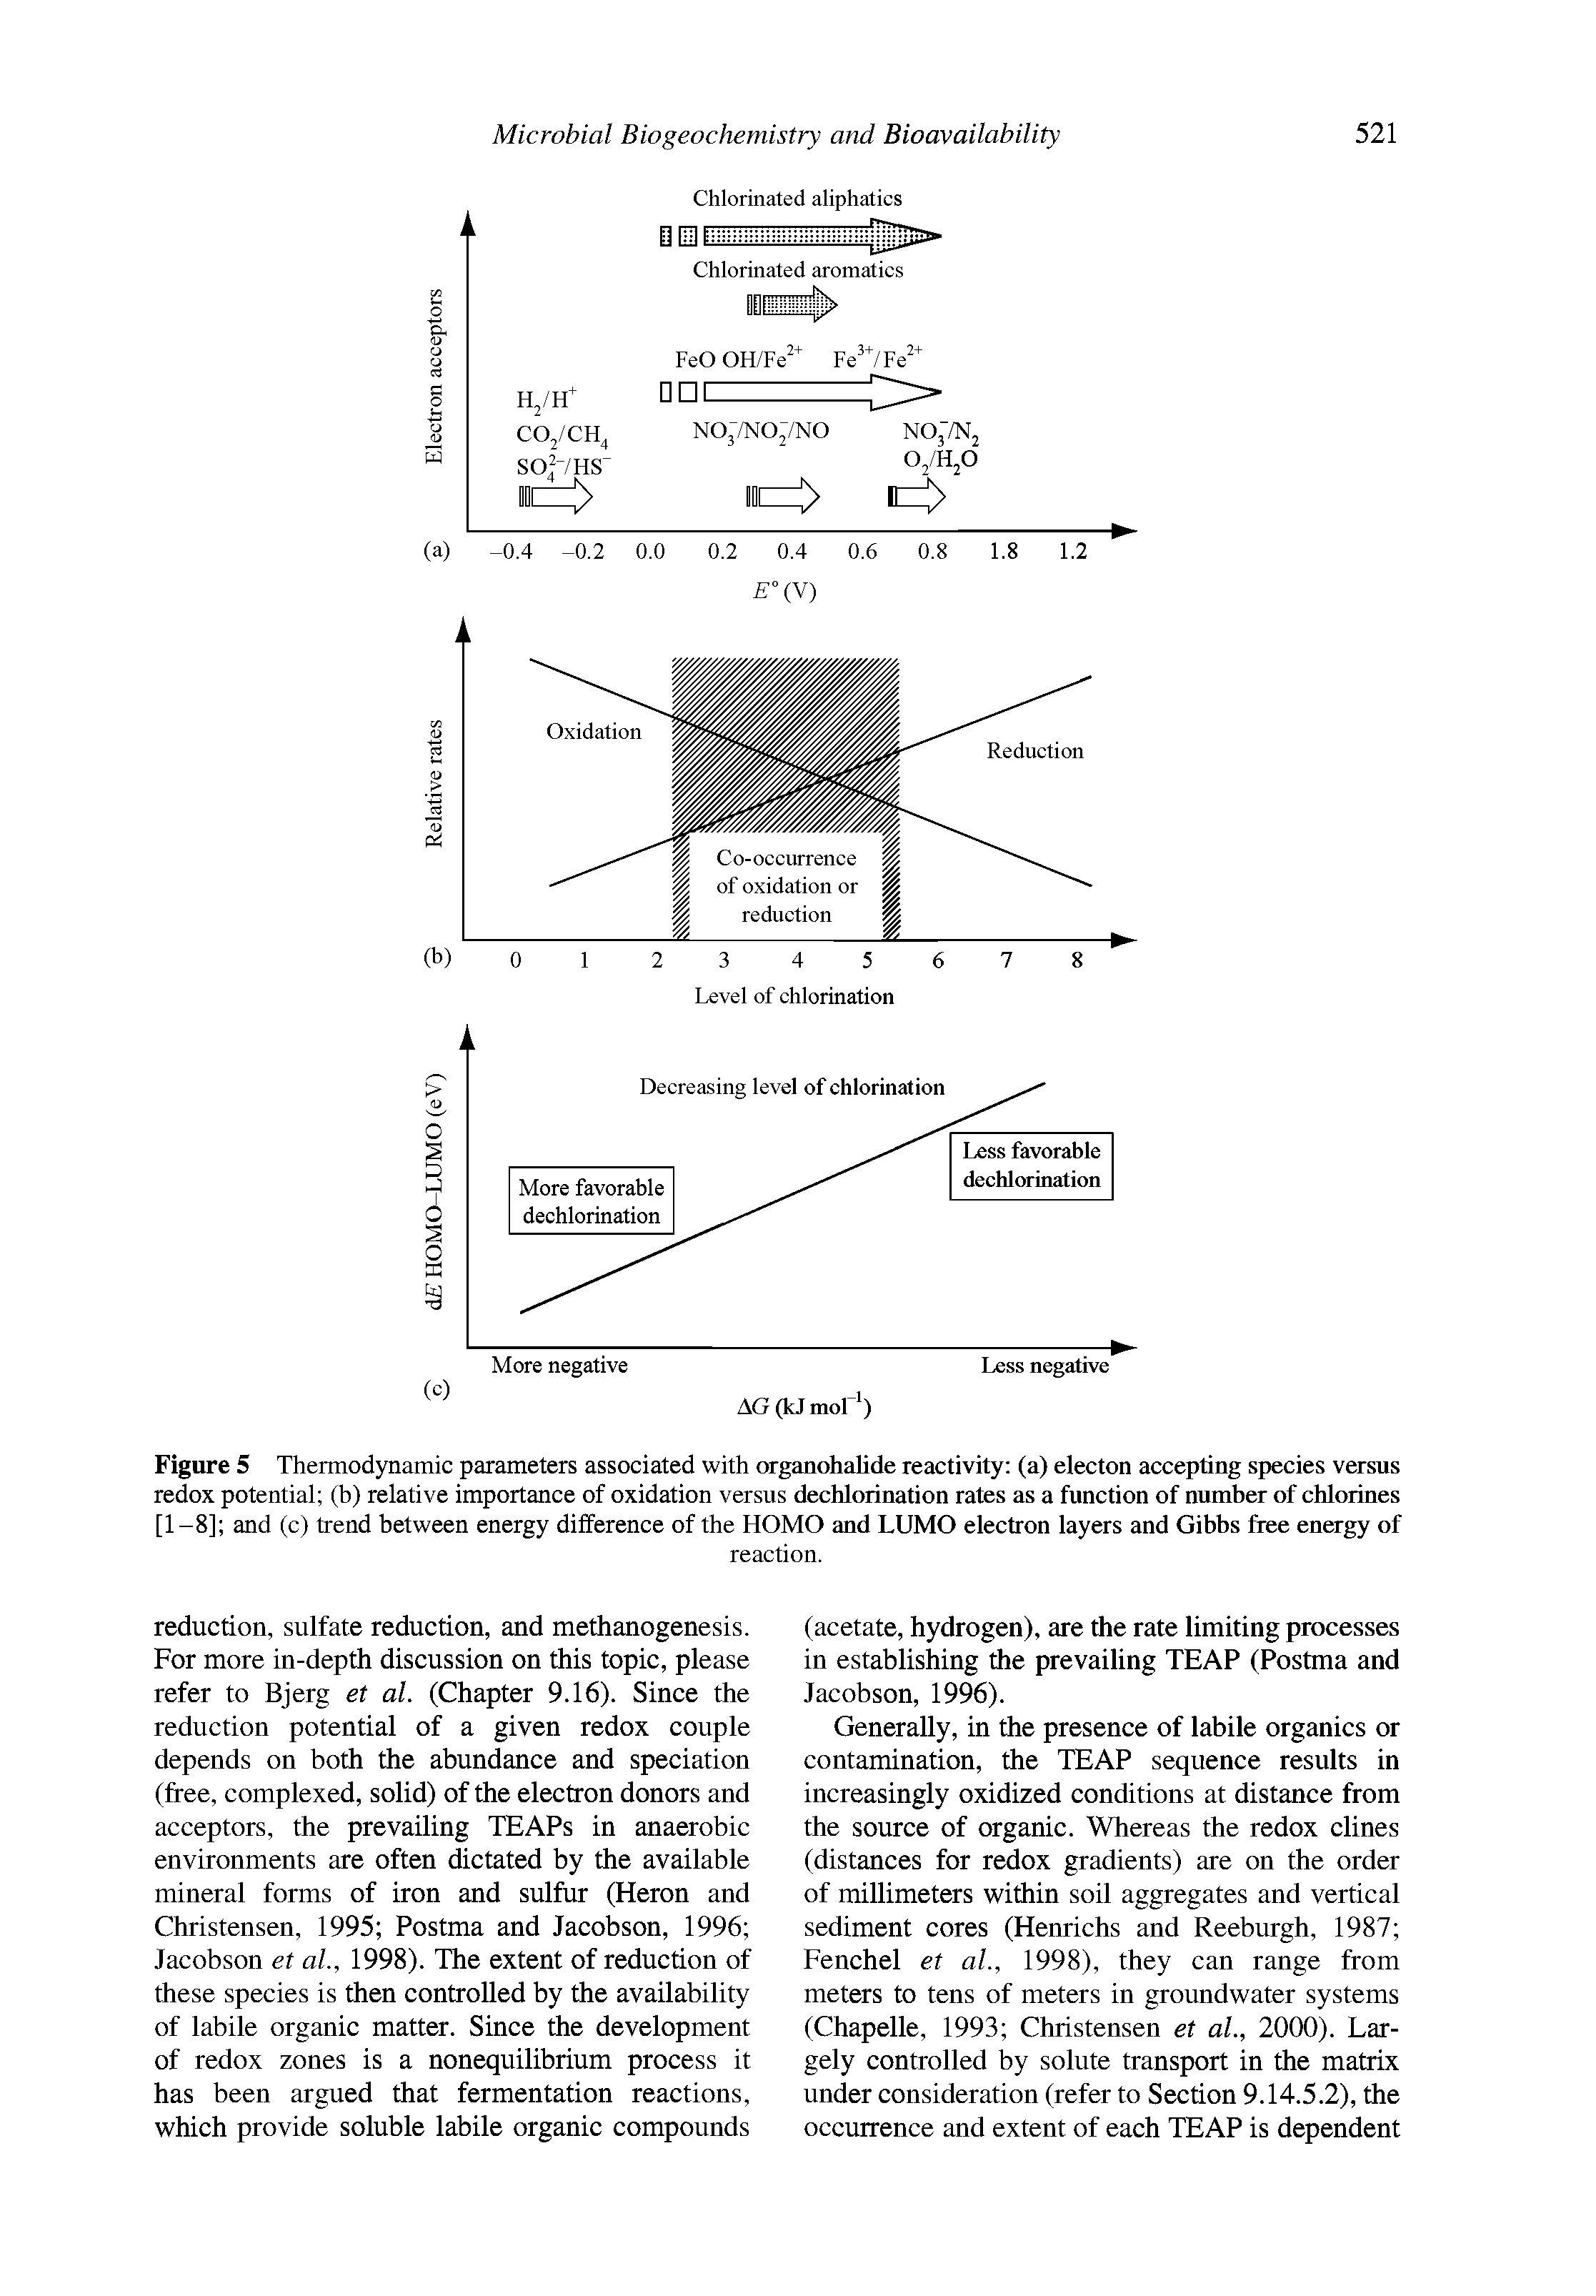 Figure 5 Thermodynamic parameters associated with organohaUde reactivity (a) electon accepting species versus redox potential (b) relative importance of oxidation versus dechlorination rates as a function of number of chlorines [1-8] and (c) trend between energy difference of the HOMO and LUMO electron layers and Gibbs free energy of...